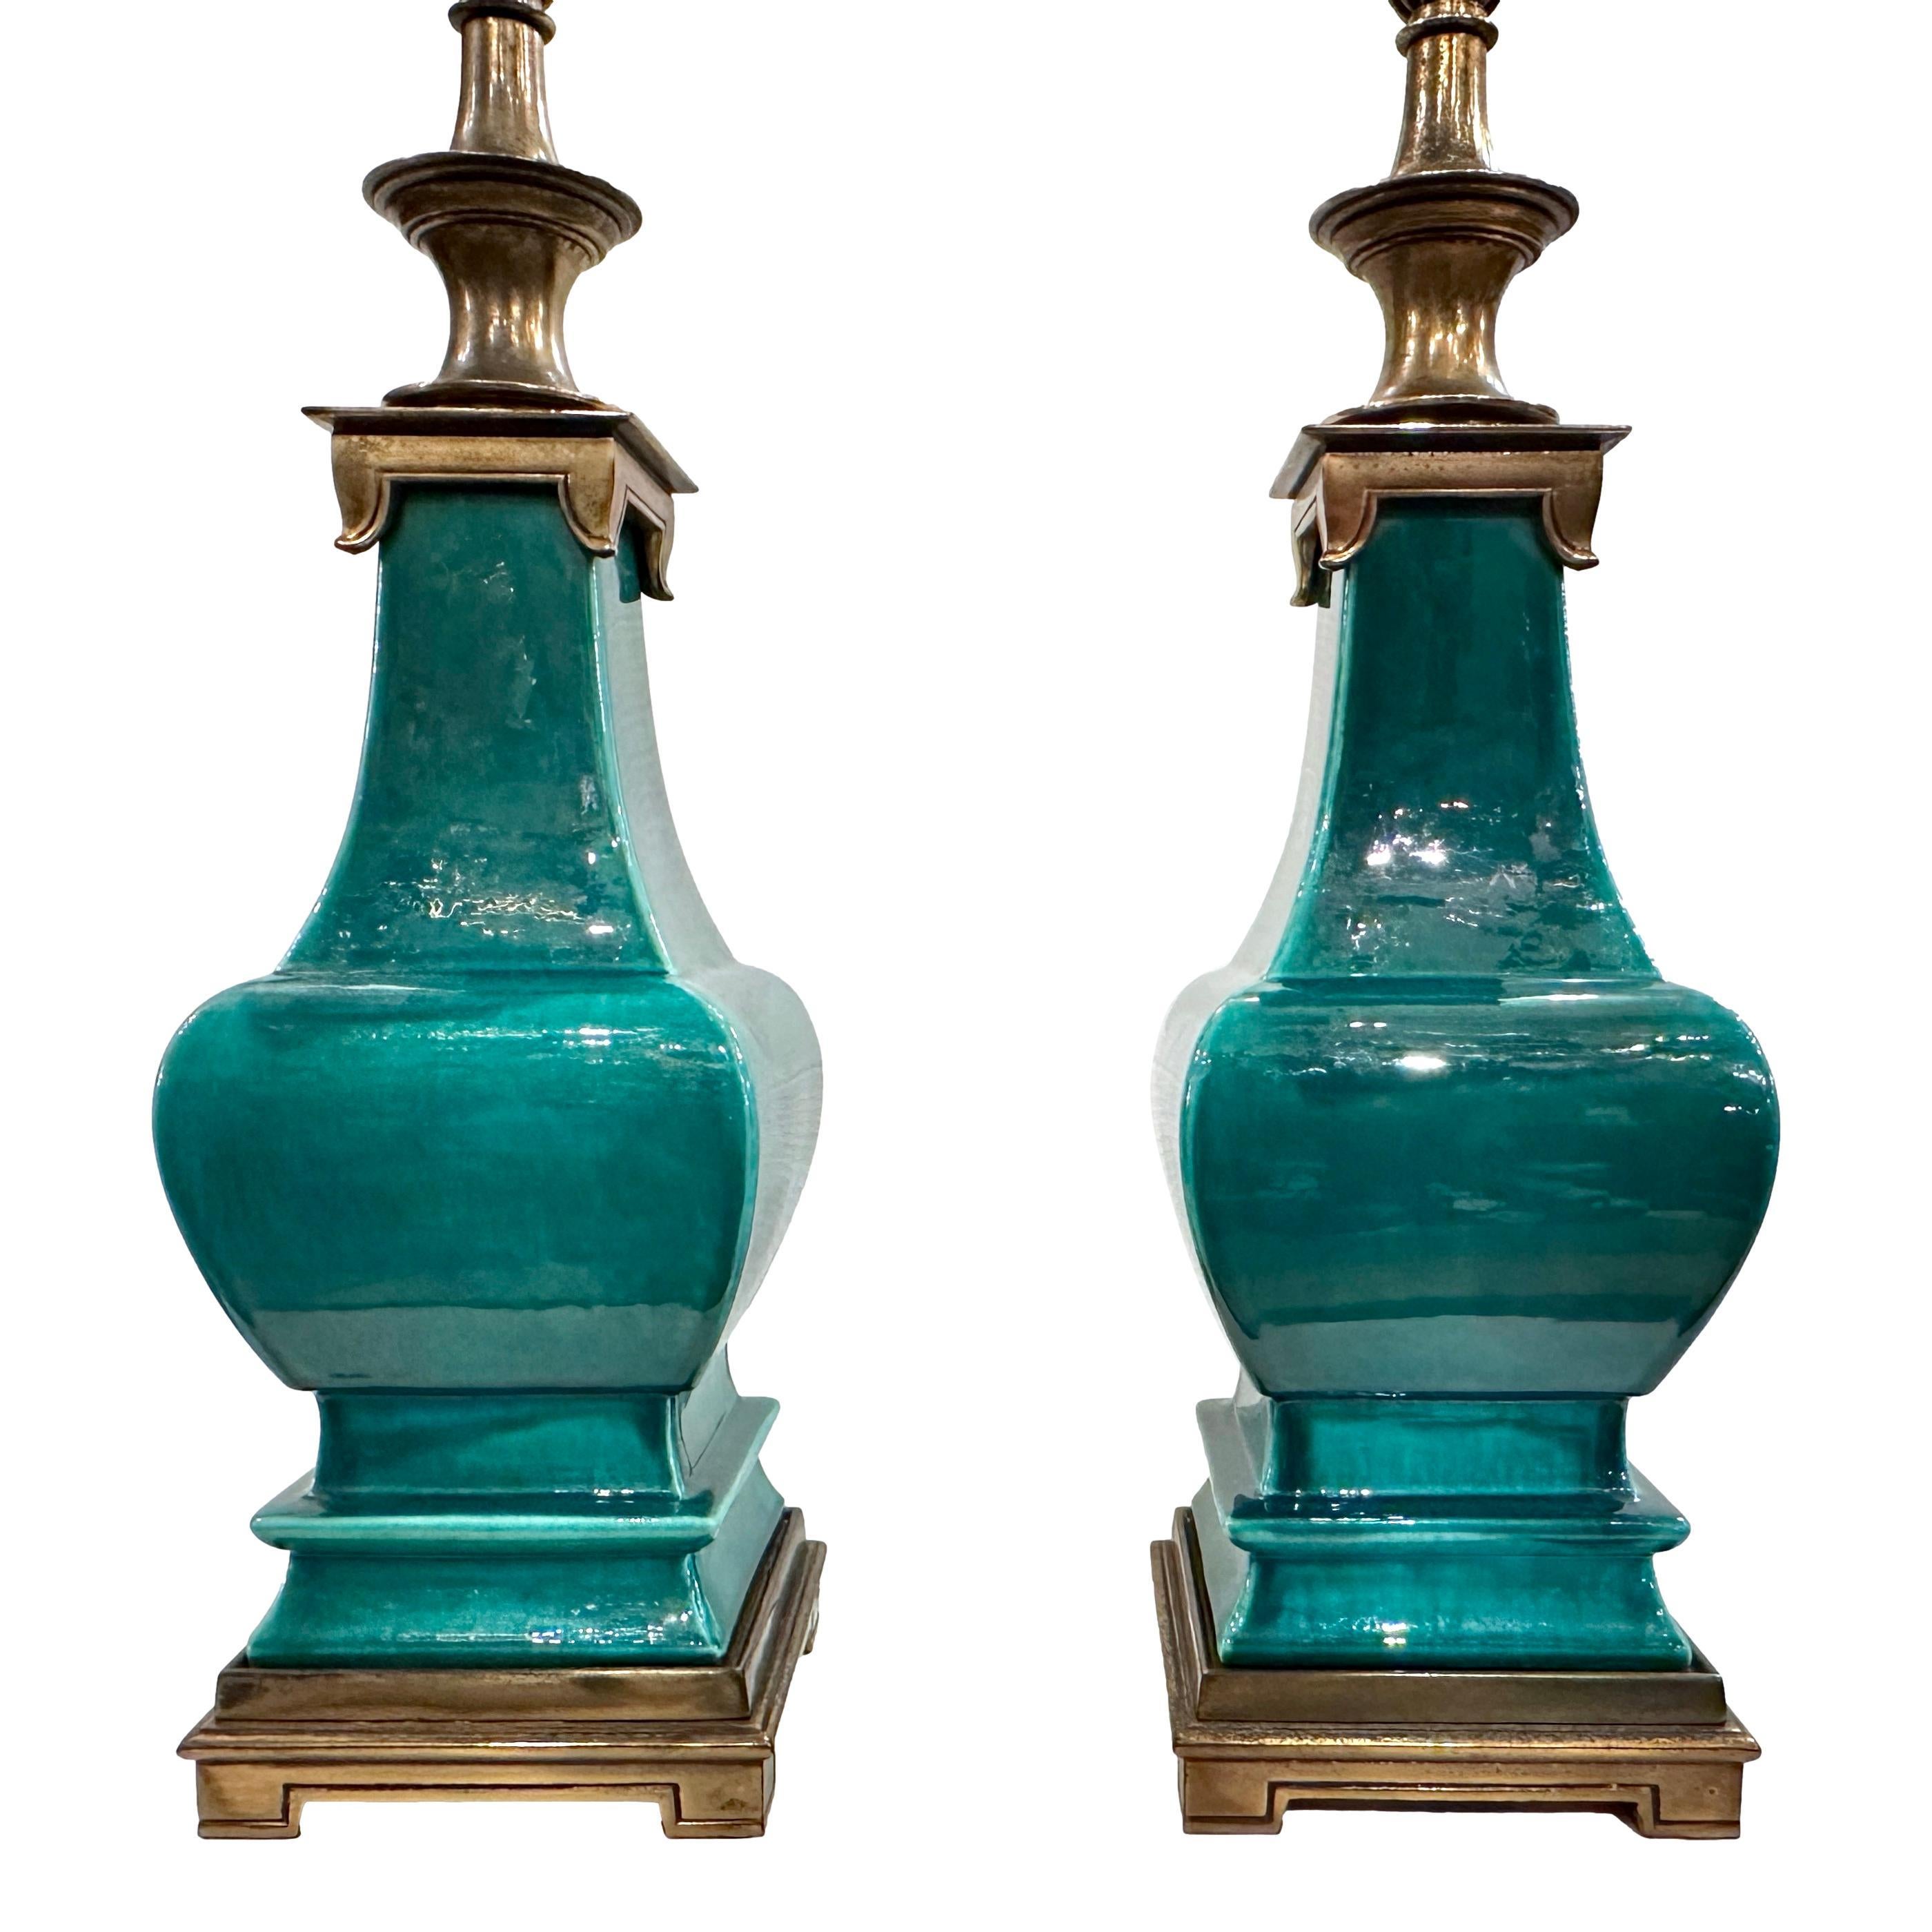 Pair of French circa 1940's emerald green glazed porcelain table lamps with brass bases.

Measurements:
Height of porcelain body: 18